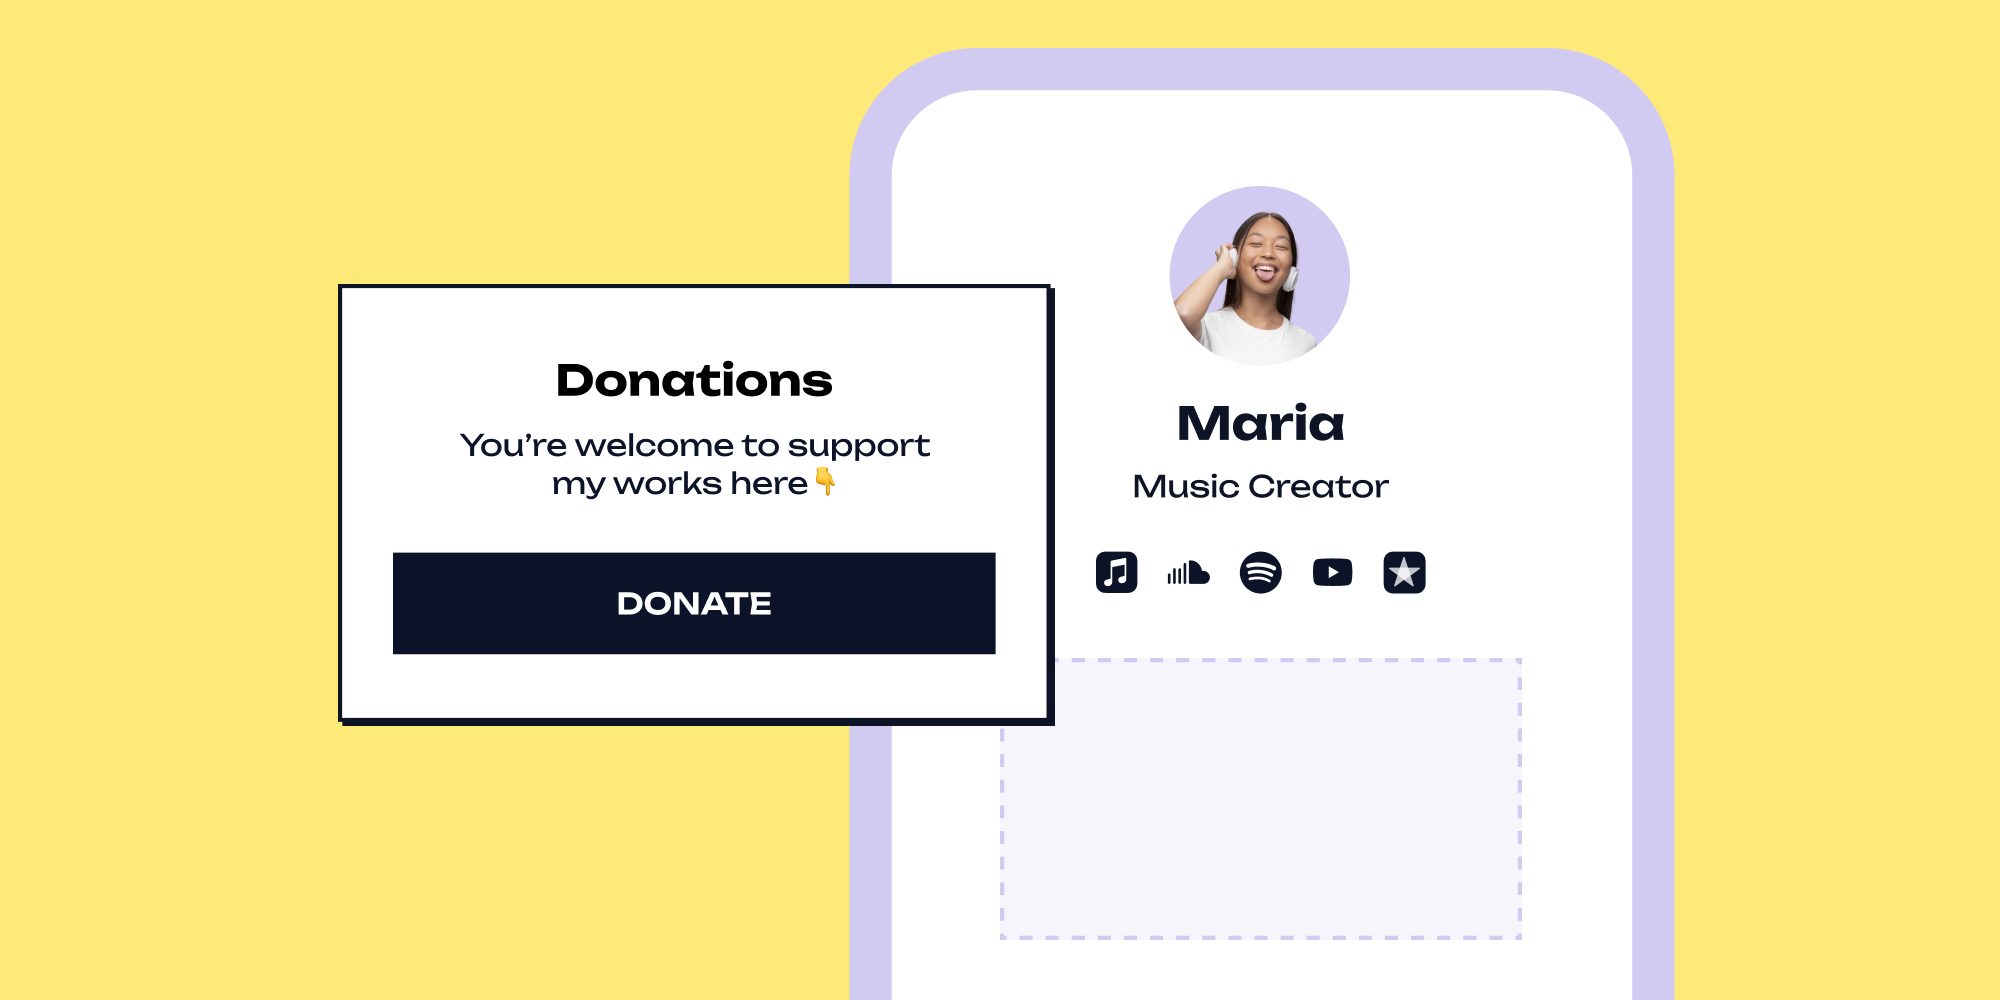 Boost Your Impact: Collect Donations as a Social Media Influencer